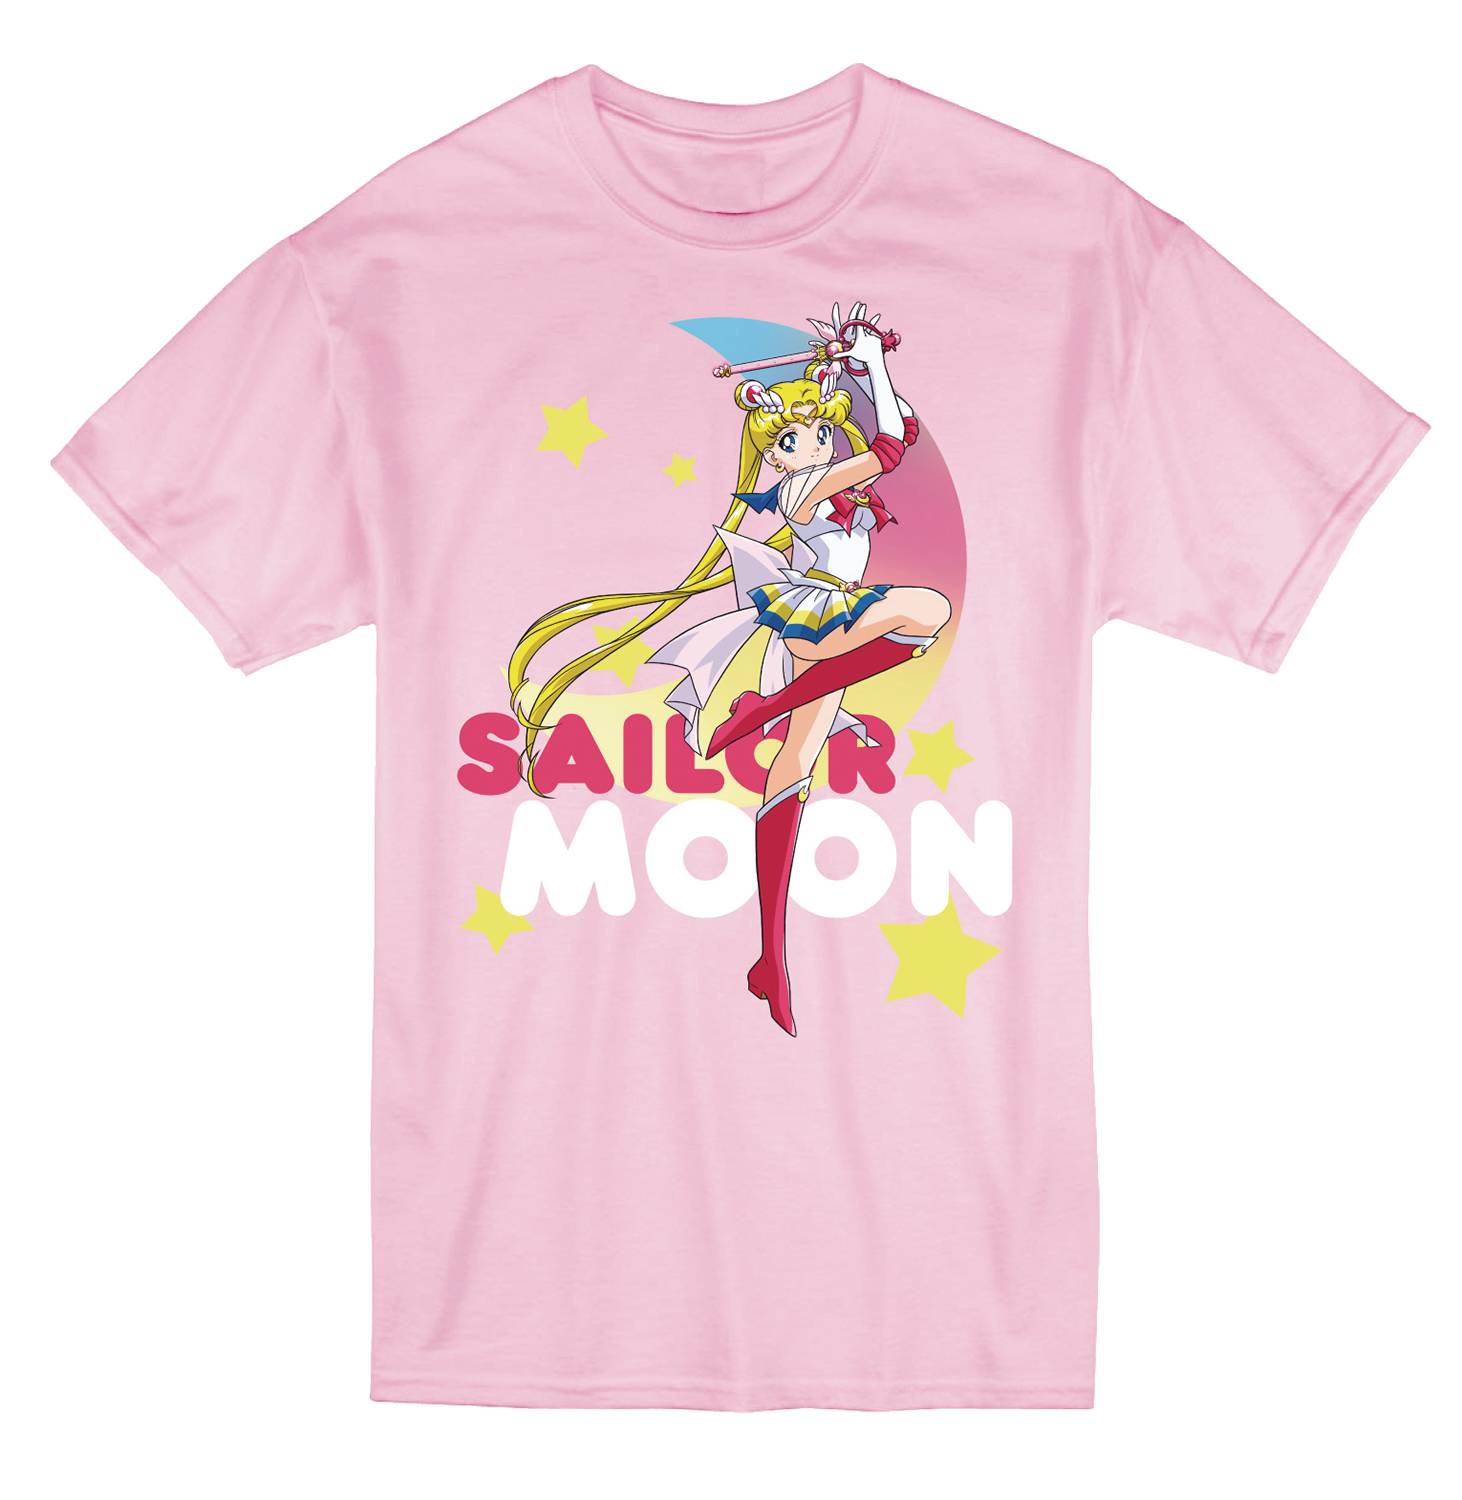 AUG202077 - SAILOR MOON SUPERS S PINK T/S SM - Previews World